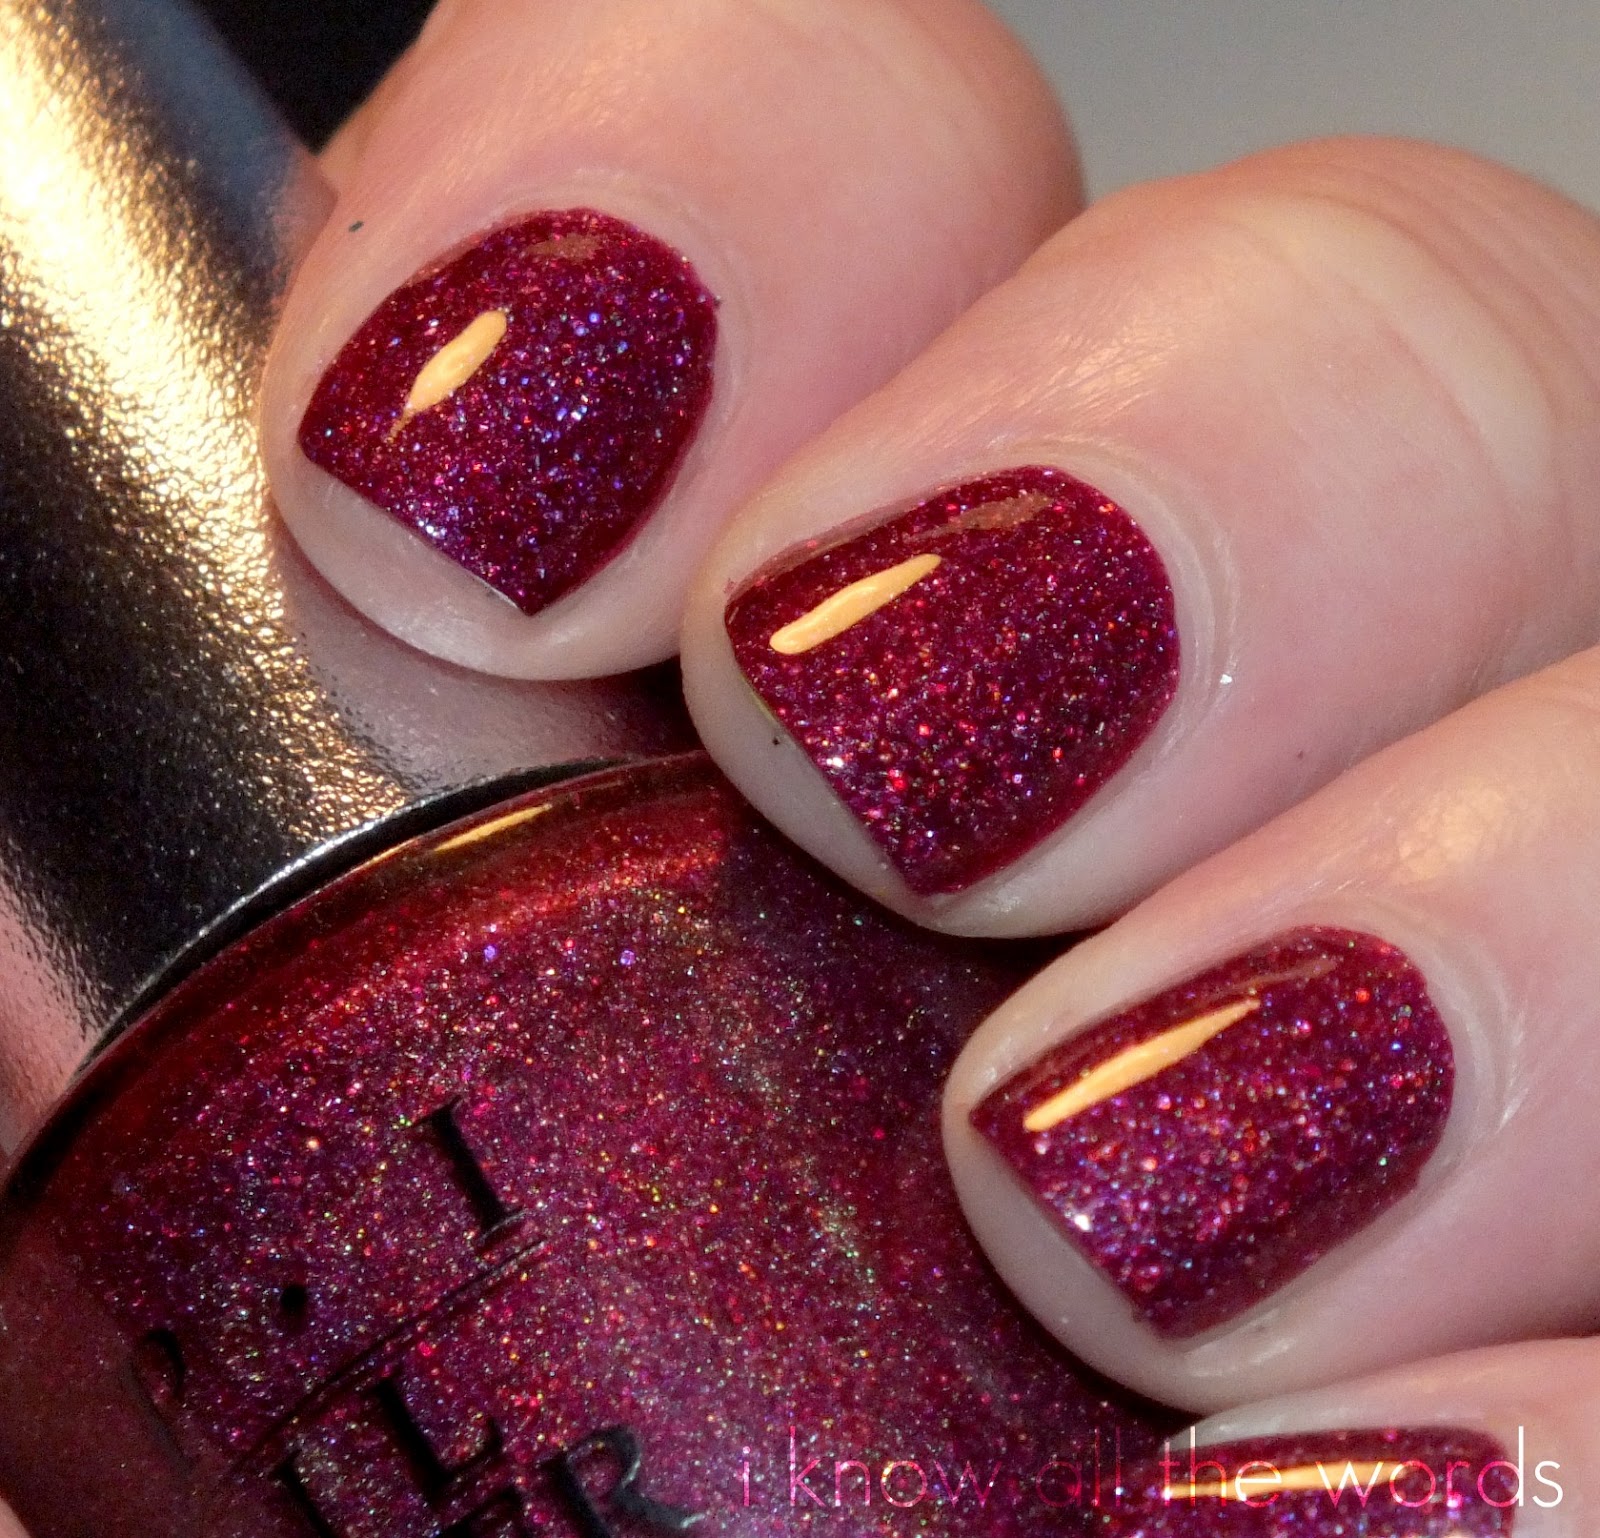 Swatched: OPI Designer Series Extravagance | I Know all the Words